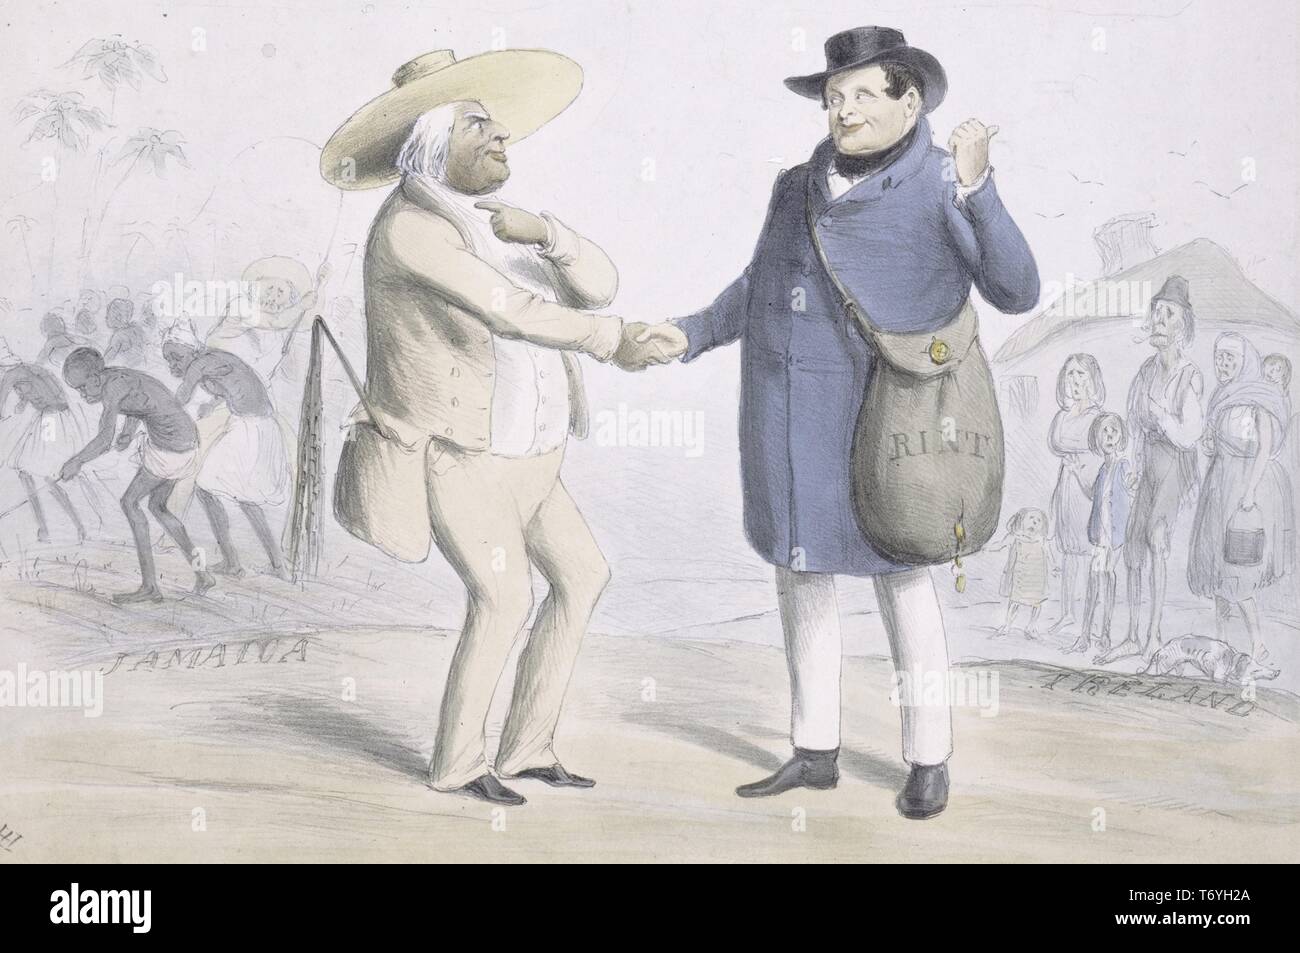 Illustrated political sketch 'Slavery and Freedom', an African-American shaking hands with an Irish man, 1838. From the New York Public Library. () Stock Photo